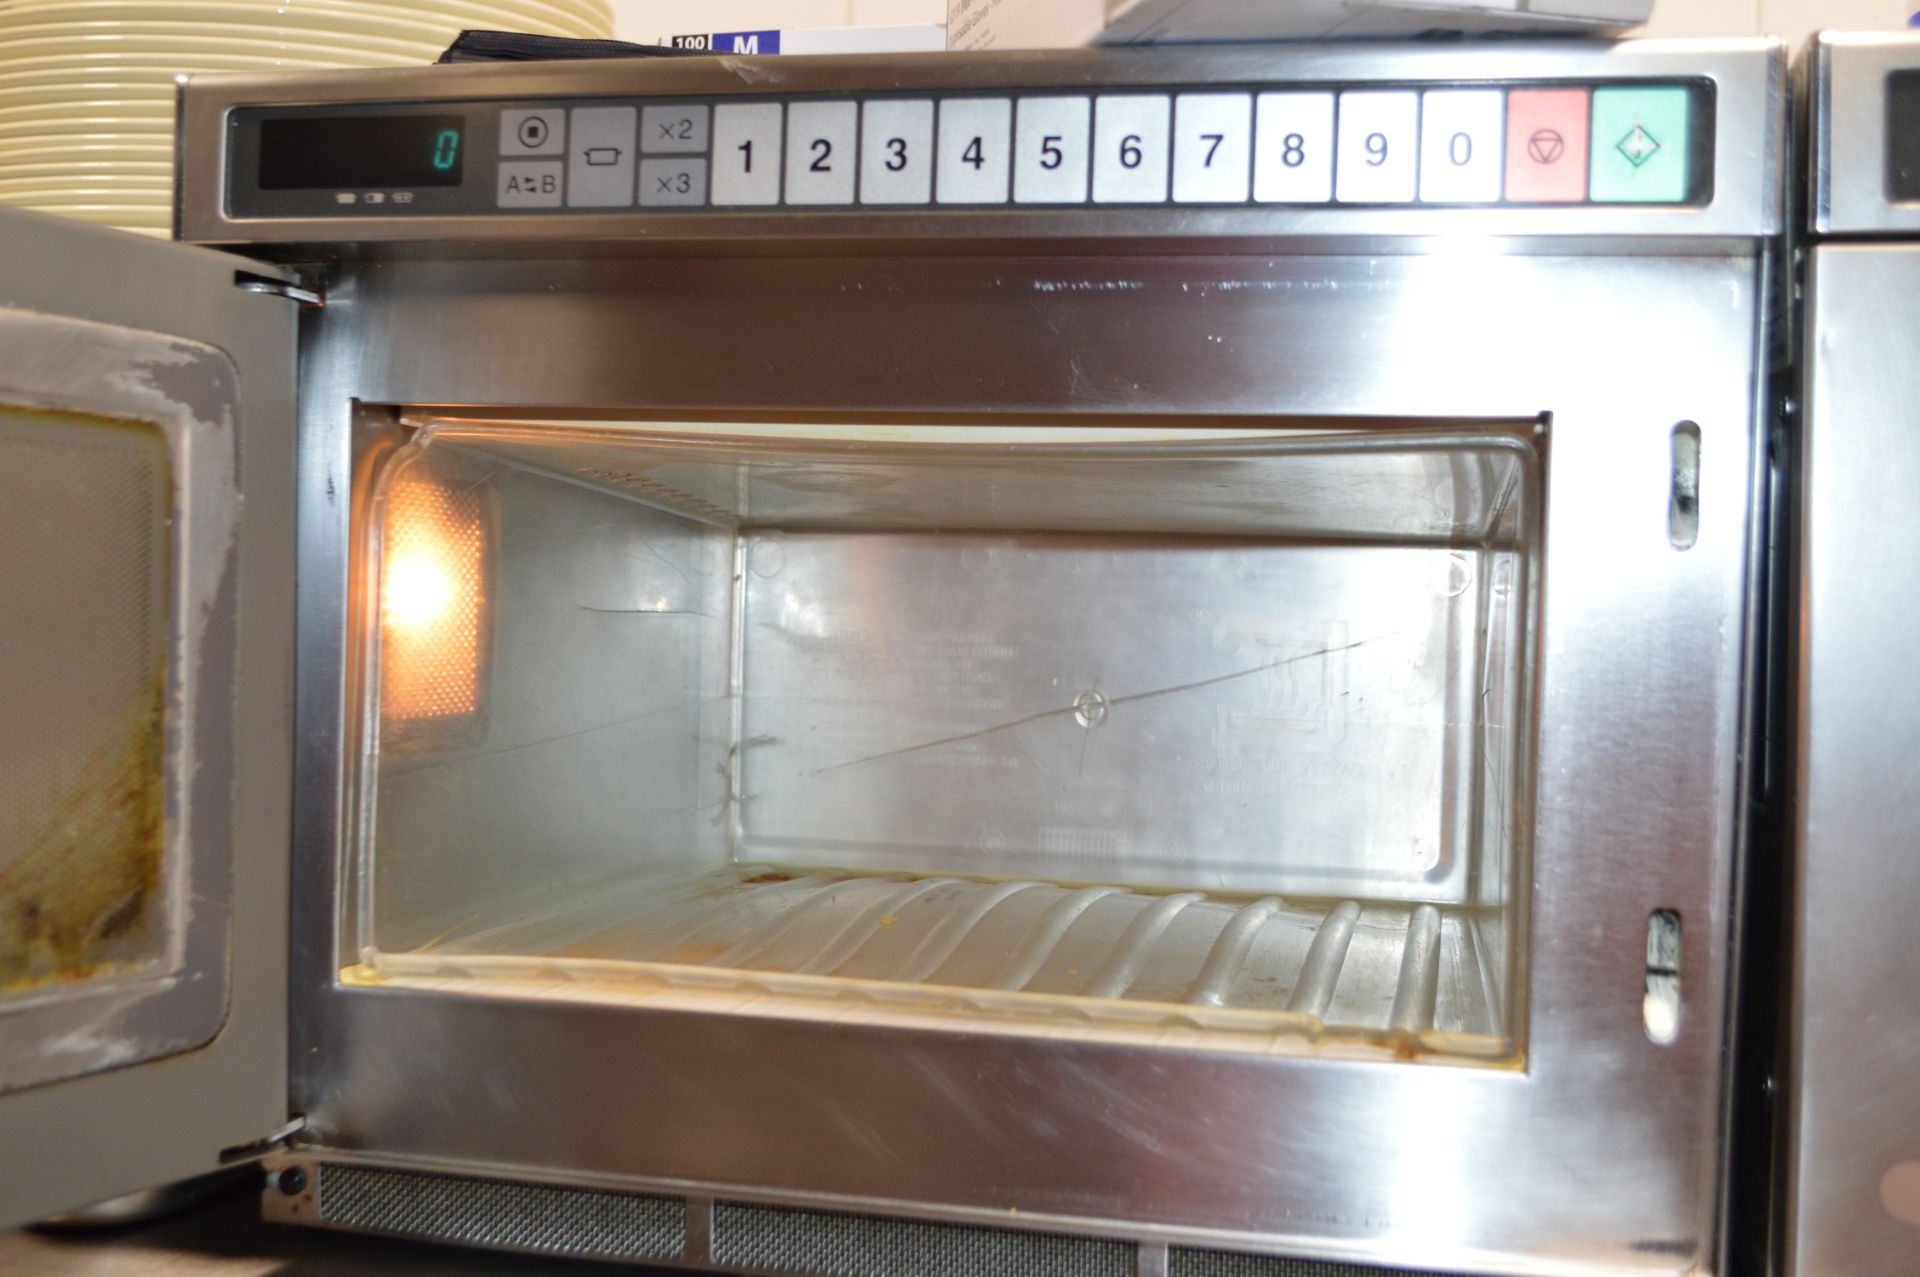 1 x Panasonic Commercial Microwave Oven With Stainless Steel Exterior - Ref NC370 - CL390 - - Image 2 of 2